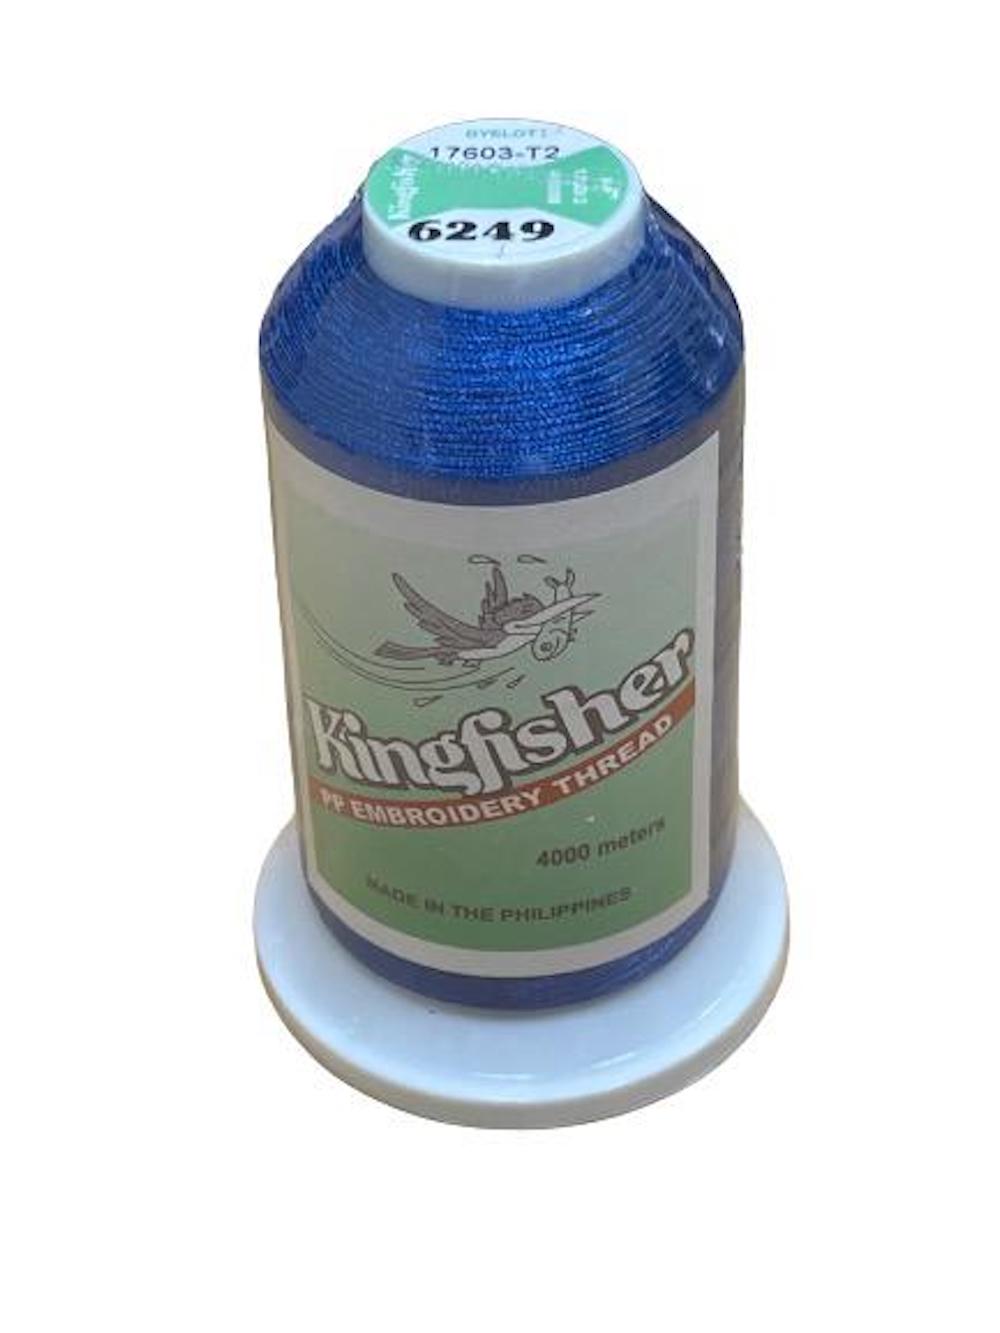 King Fisher Embroidery Thread 4000m 6249 - MY SEWING MALL